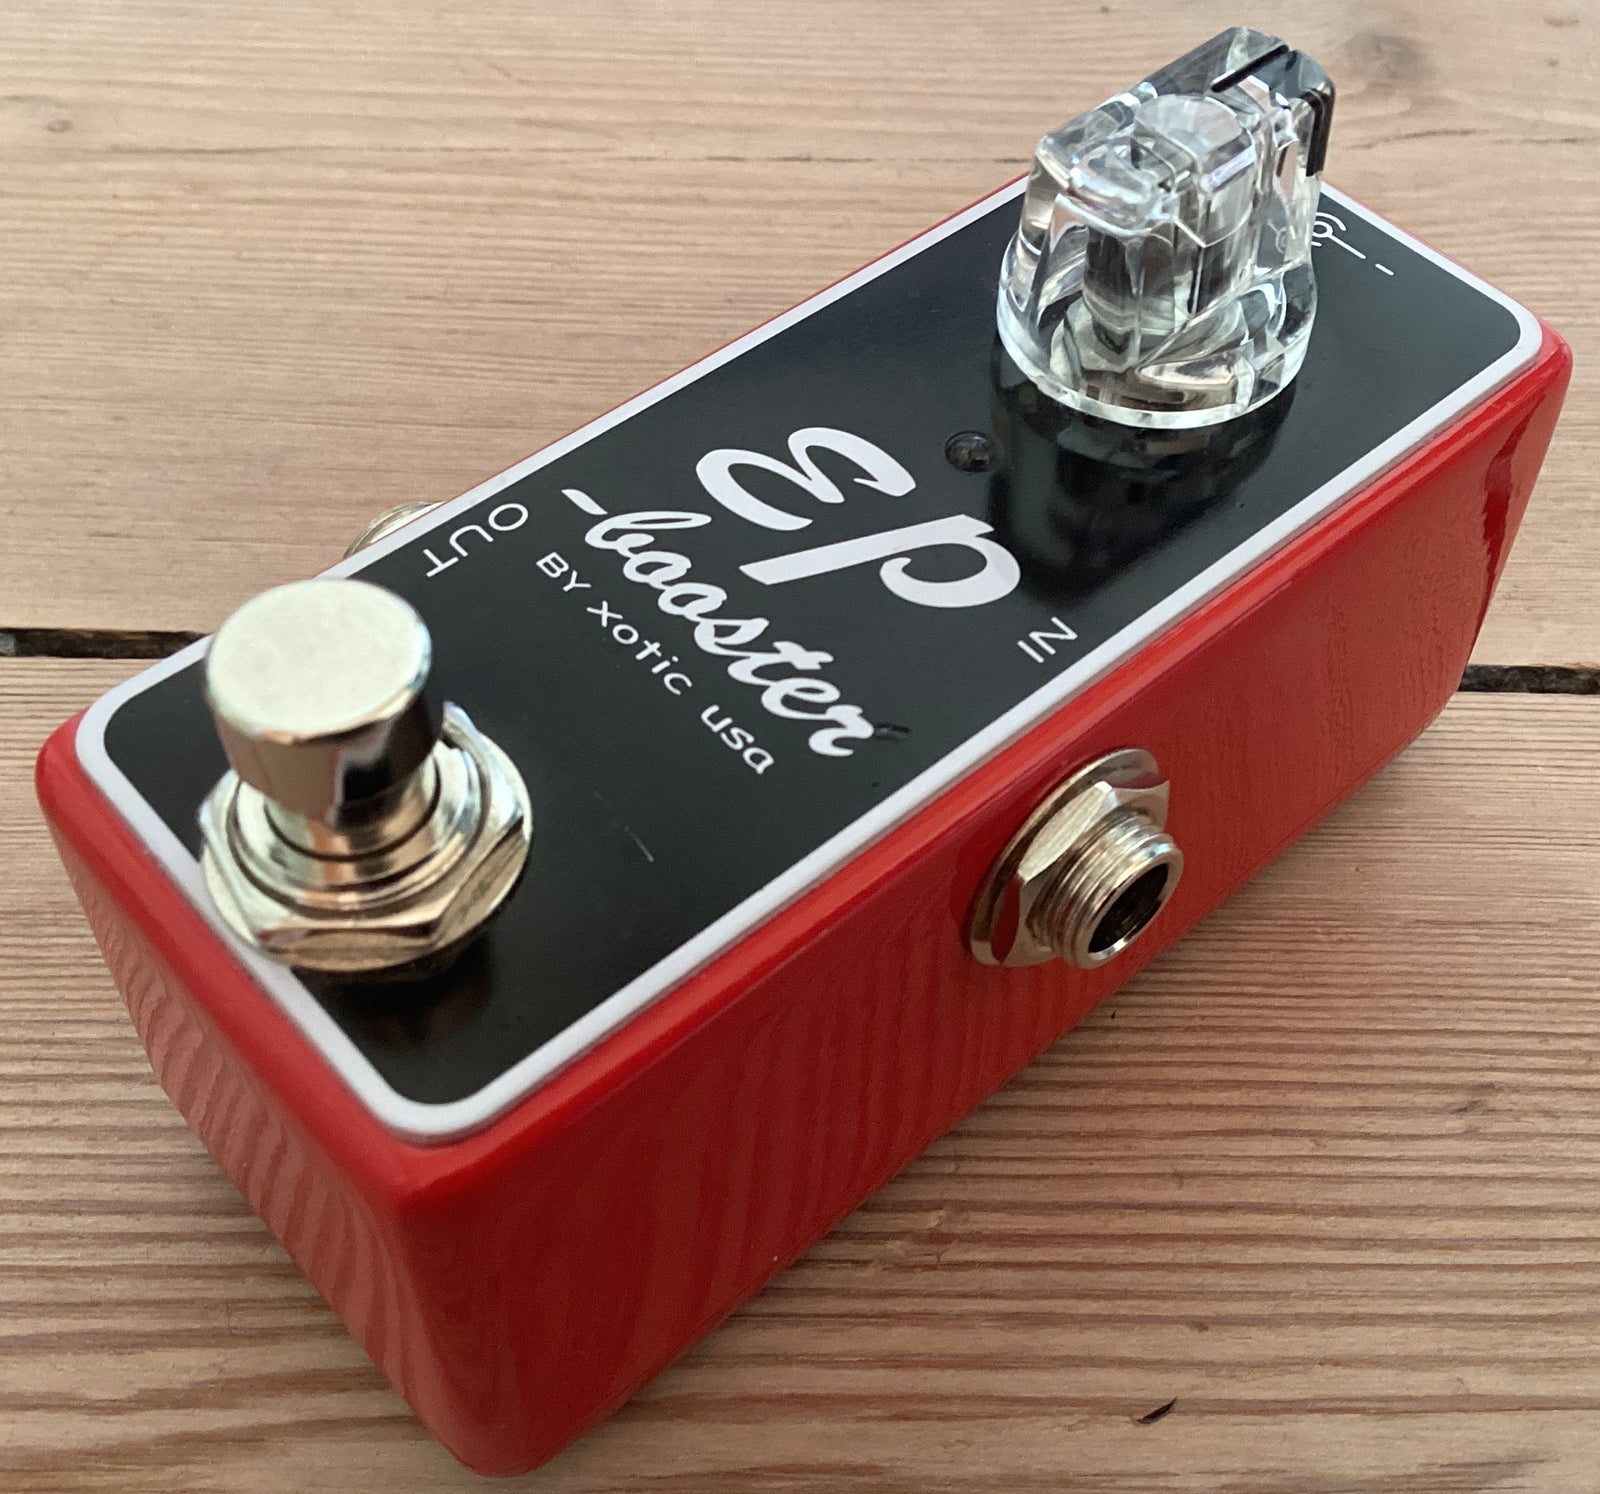 EP Booster, Xotic Effects Red Limited Edition